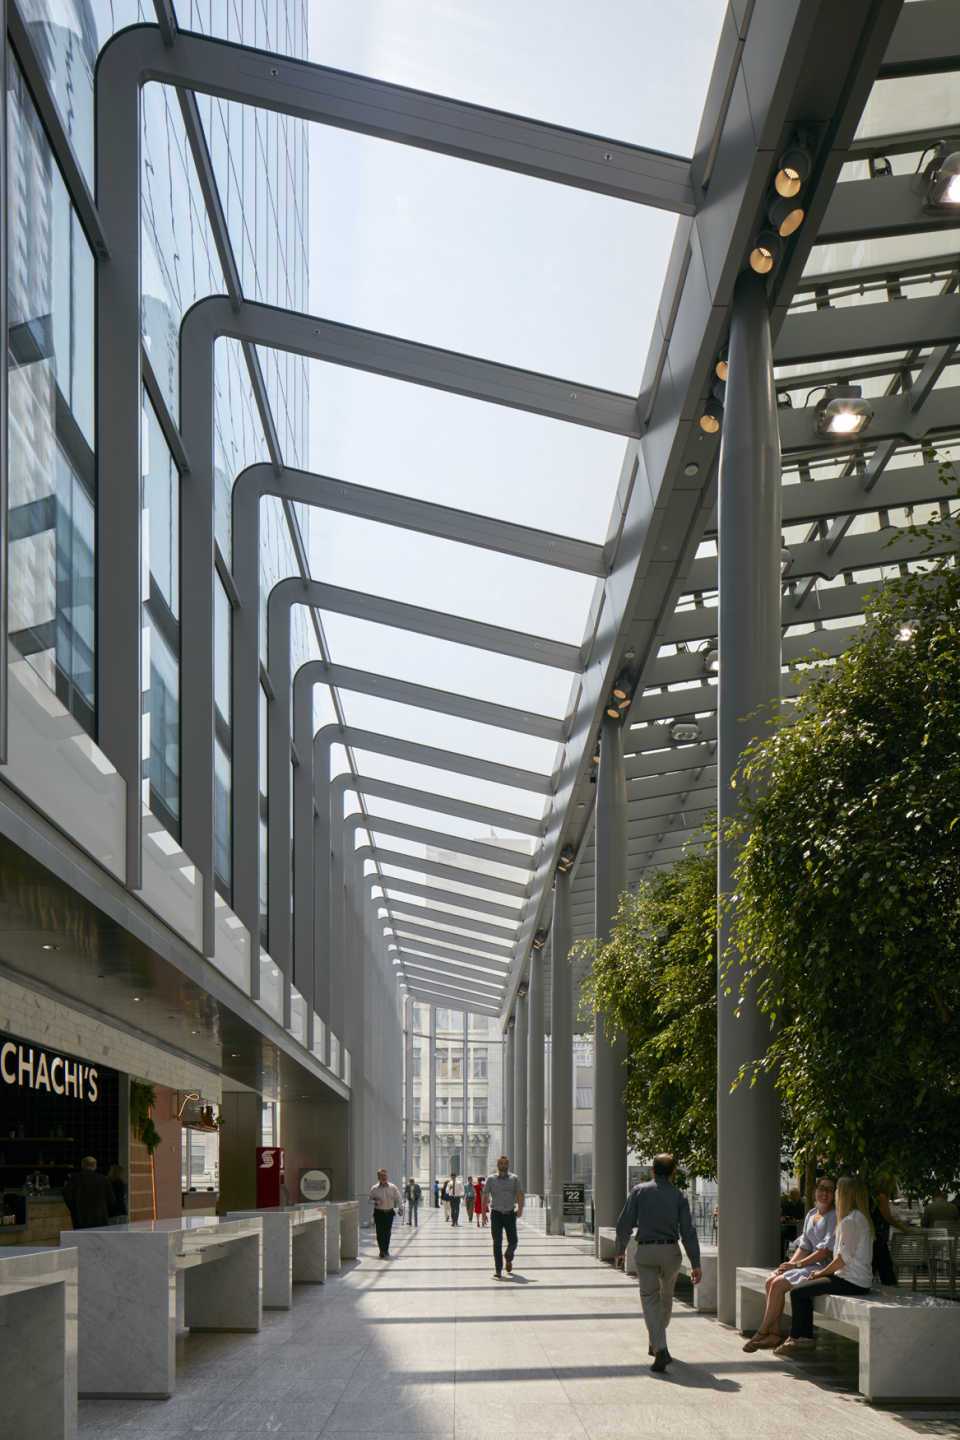 The amenities are concentrated within the wintergarden pavilion